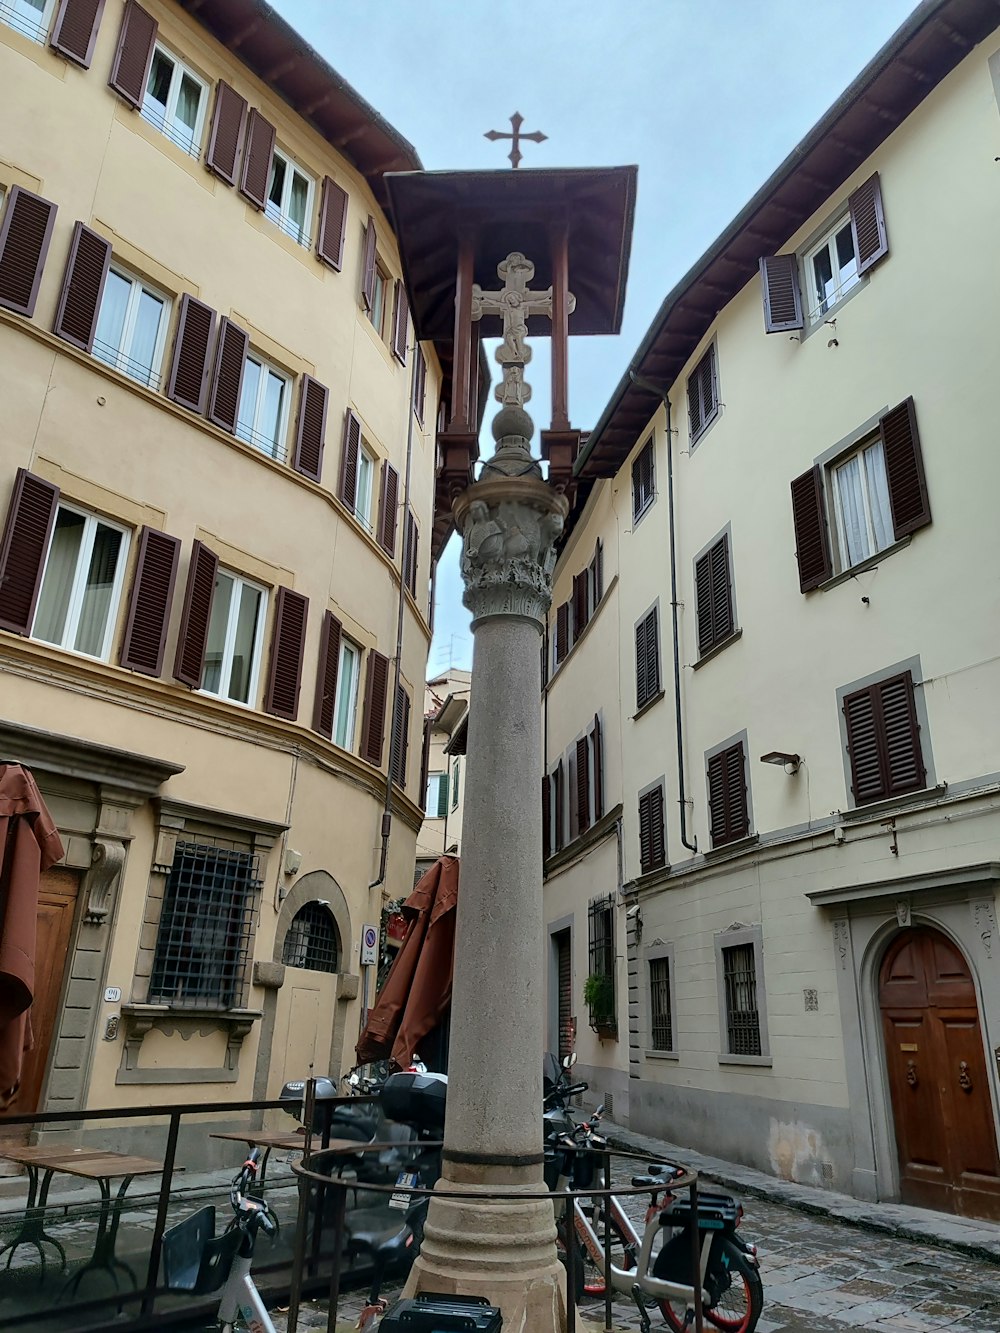 a cross on top of a pillar in front of a building